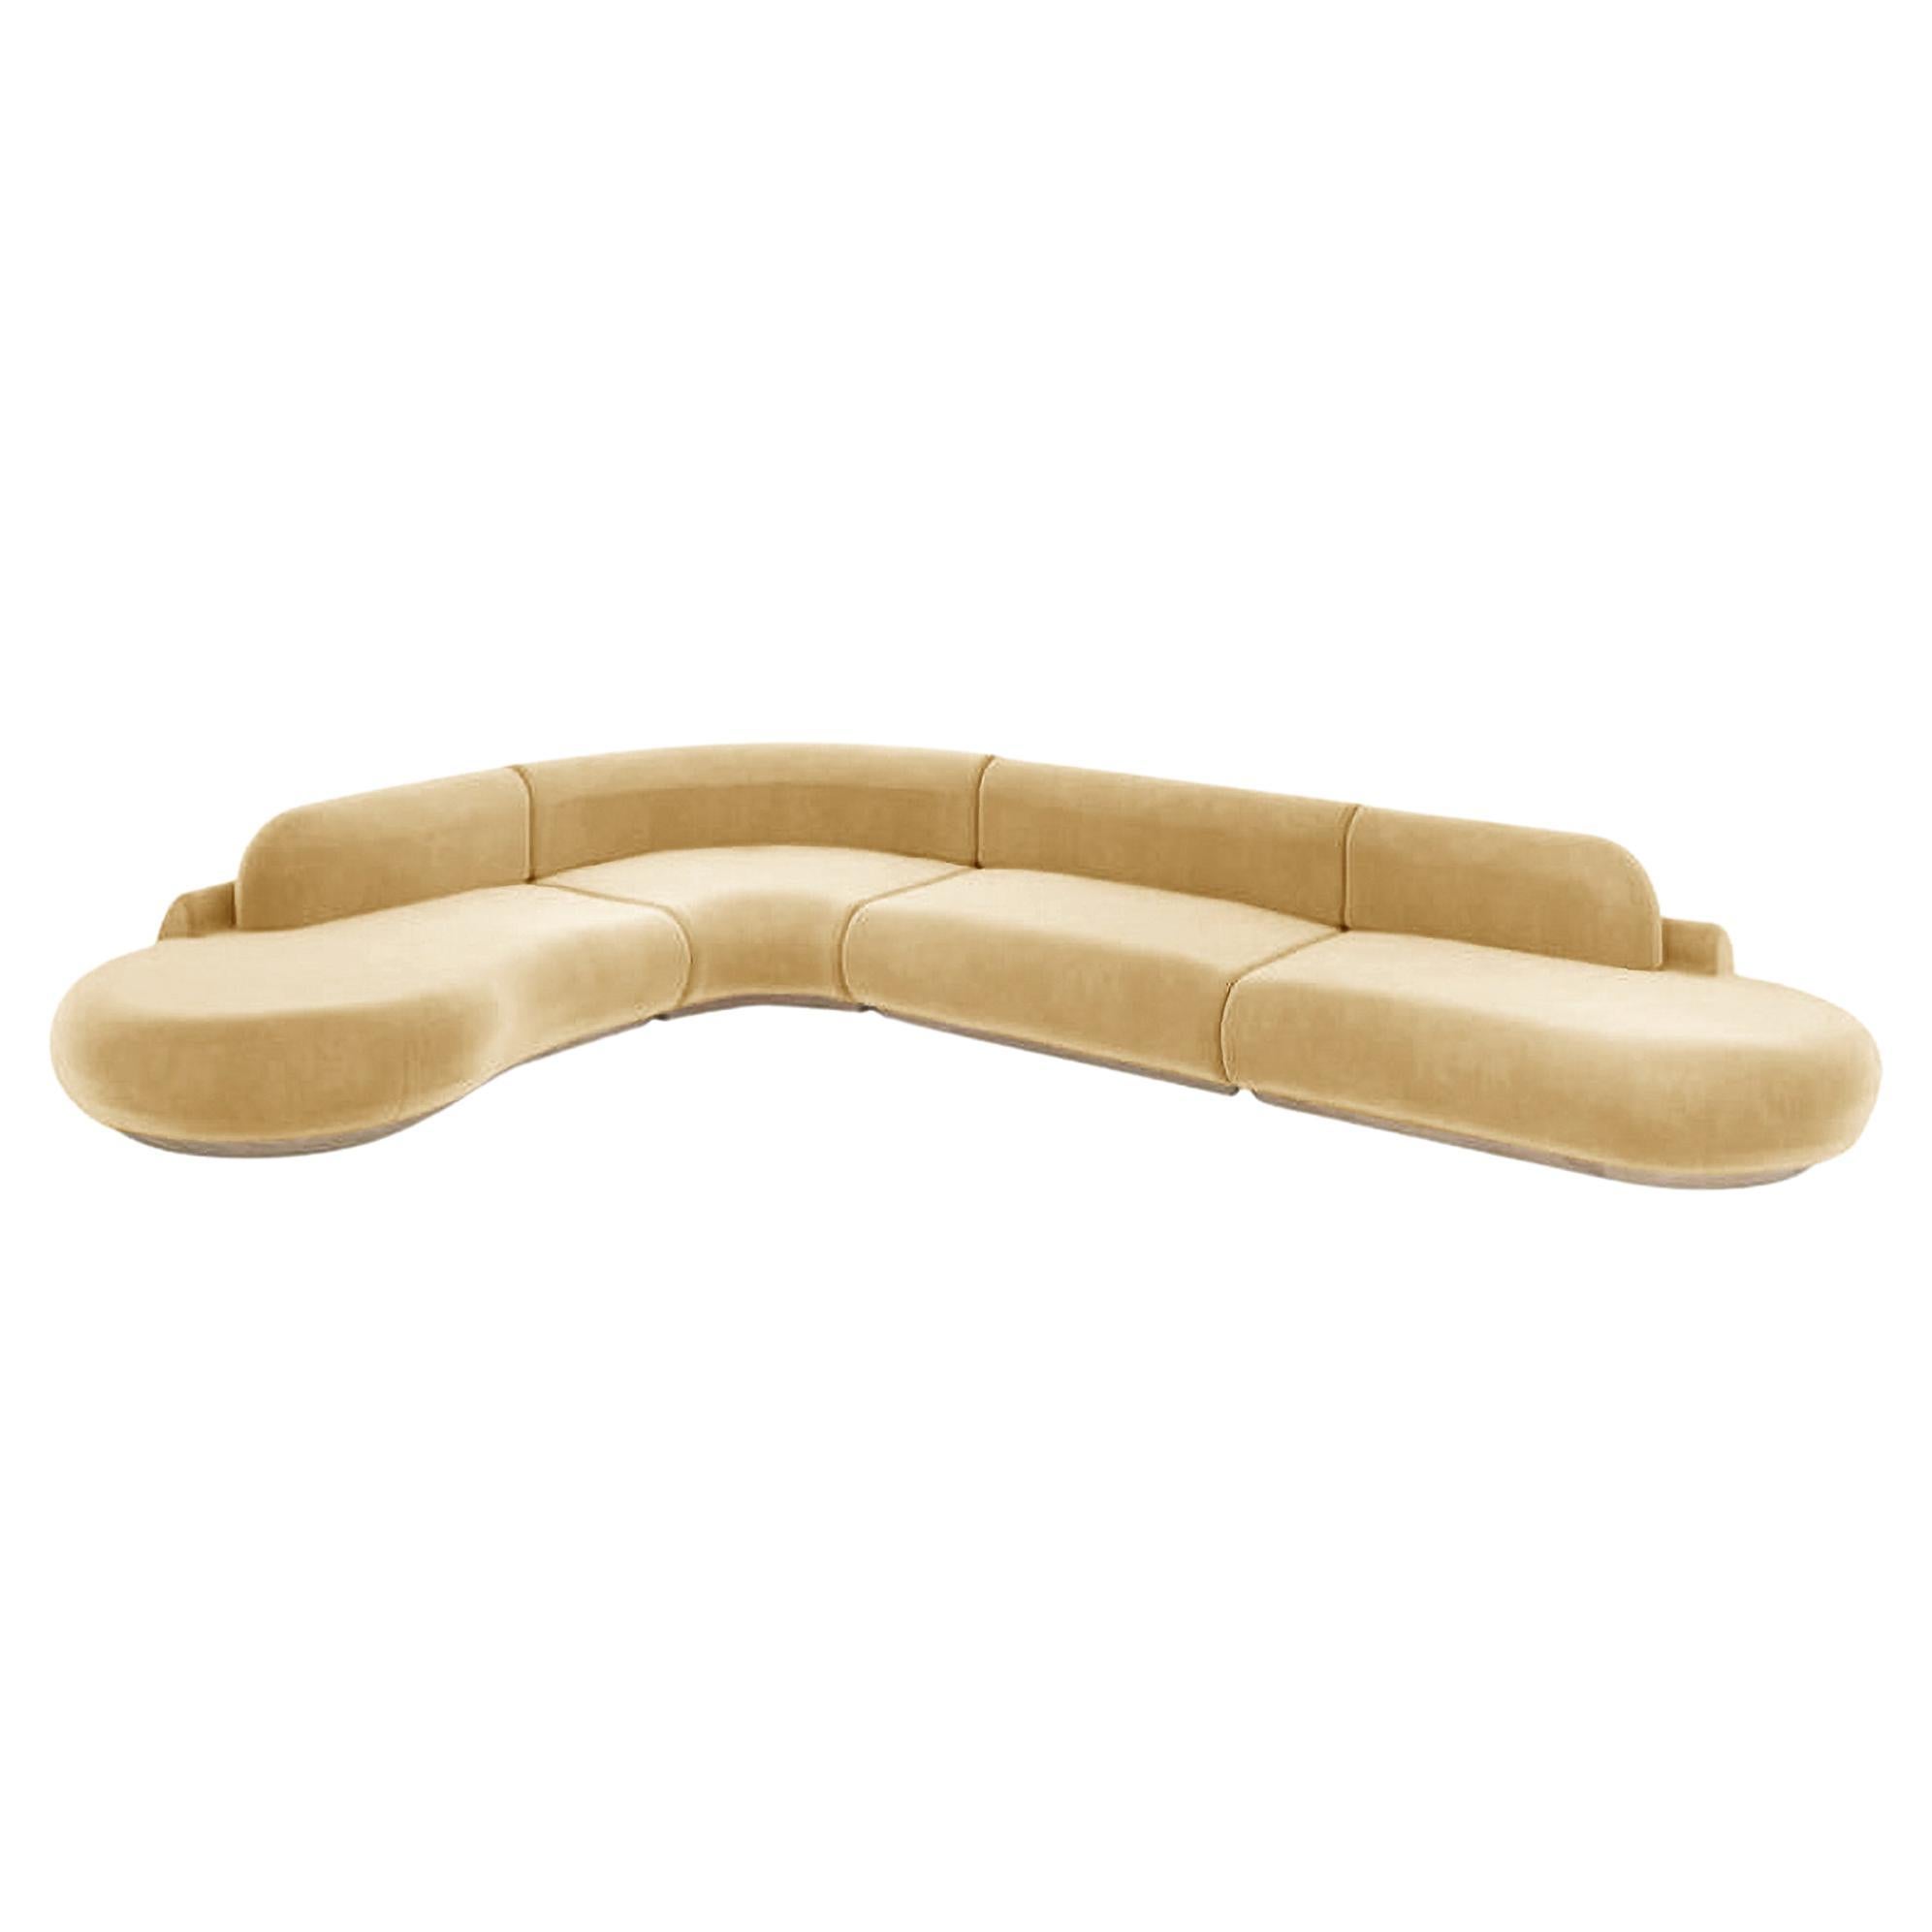 Naked Curved Sectional Sofa, 4 Piece with Natural Oak and Vigo Plantain